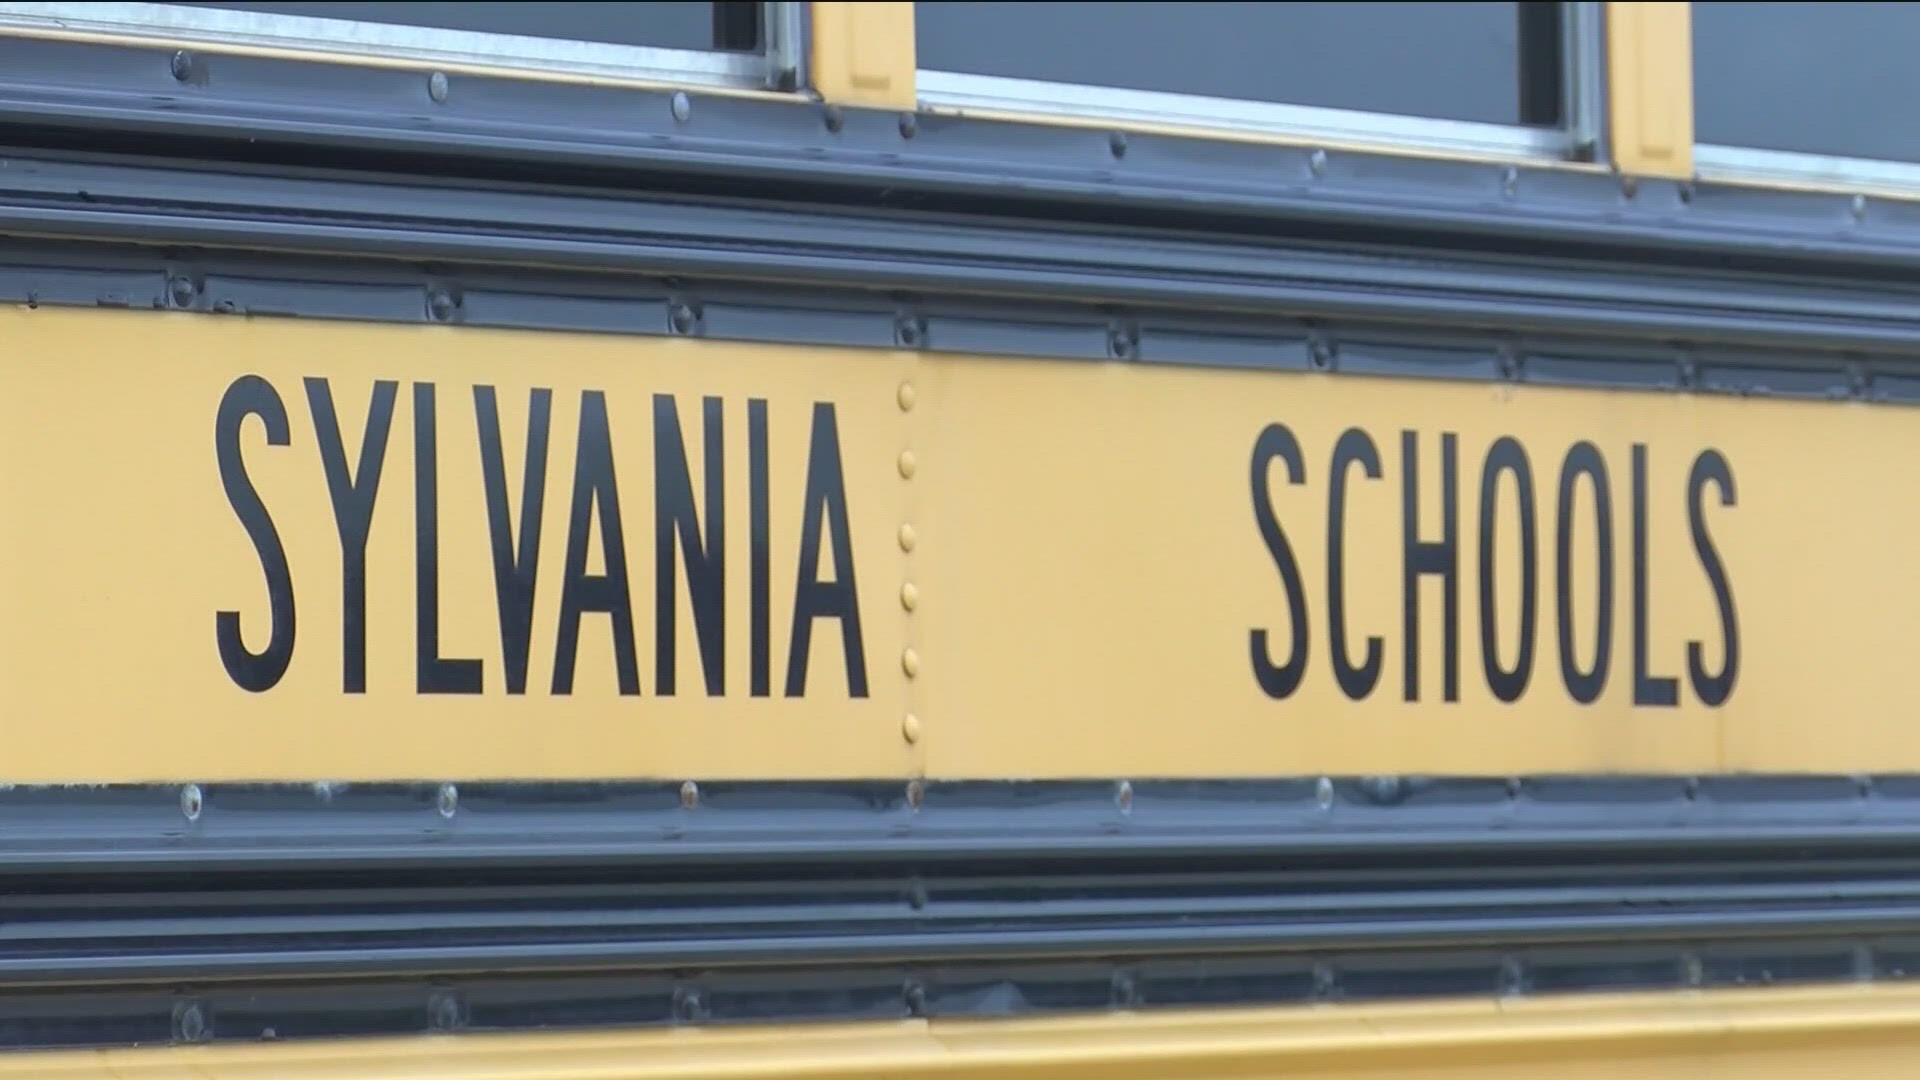 Parents refiled the lawsuit after dropping it in 2022. They allege their children, who attend non-public schools, should not receive lesser bussing services.